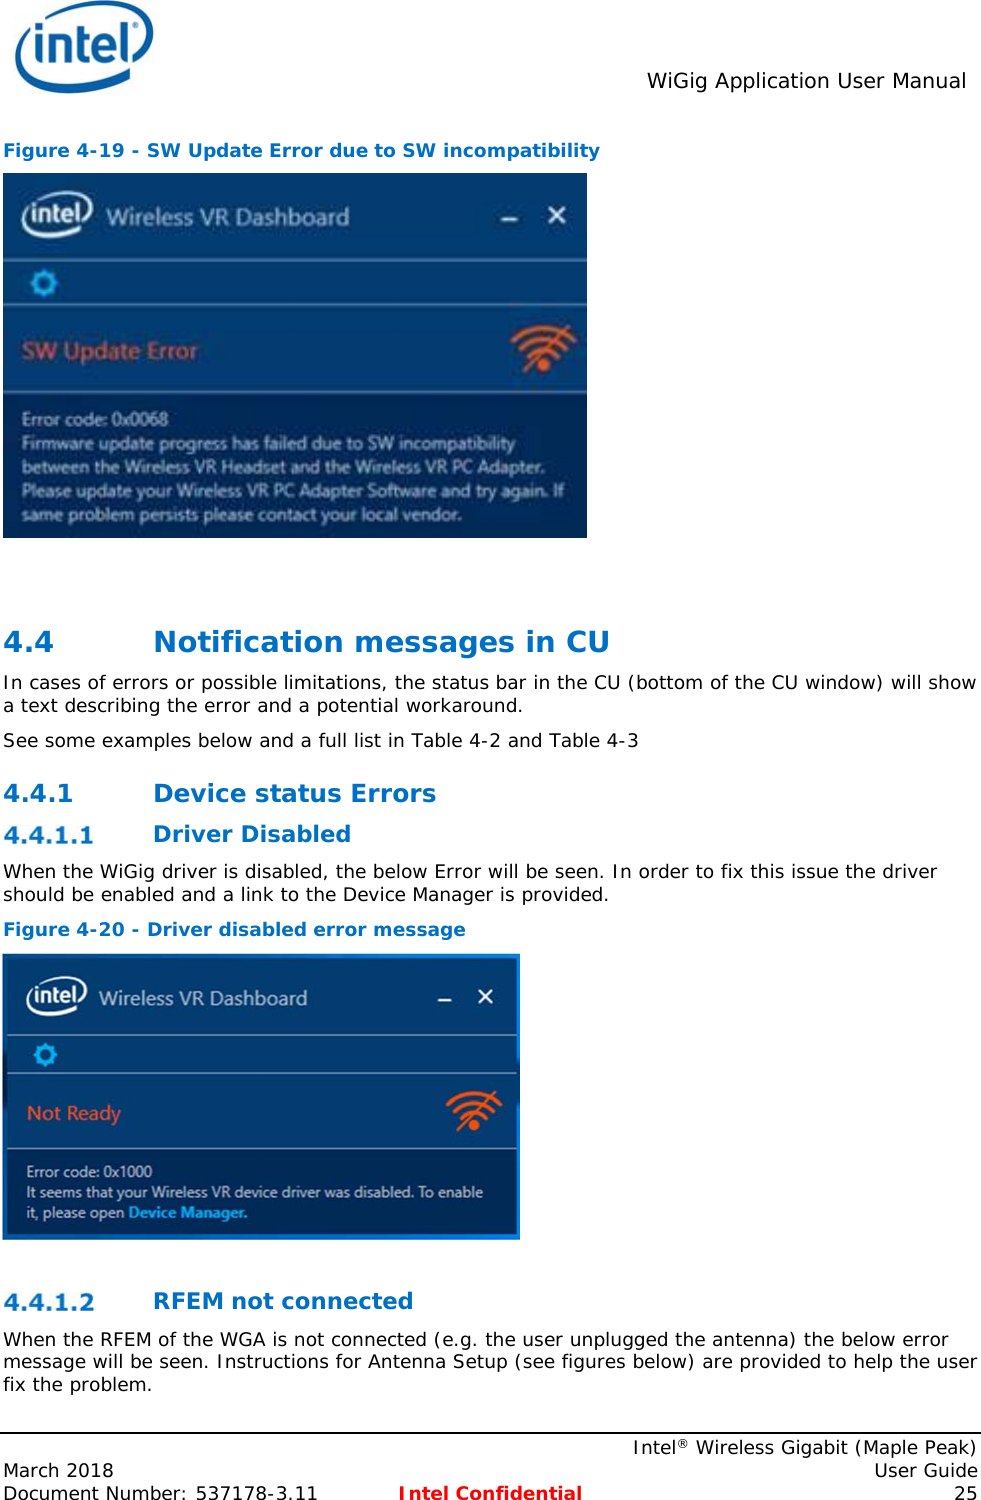  WiGig Application User Manual    Intel® Wireless Gigabit (Maple Peak) March 2018    User Guide Document Number: 537178-3.11  Intel Confidential 25 Figure 4-19 - SW Update Error due to SW incompatibility   4.4 Notification messages in CU In cases of errors or possible limitations, the status bar in the CU (bottom of the CU window) will show a text describing the error and a potential workaround. See some examples below and a full list in Table 4-2 and Table 4-3 4.4.1 Device status Errors  Driver Disabled When the WiGig driver is disabled, the below Error will be seen. In order to fix this issue the driver should be enabled and a link to the Device Manager is provided. Figure 4-20 - Driver disabled error message    RFEM not connected When the RFEM of the WGA is not connected (e.g. the user unplugged the antenna) the below error message will be seen. Instructions for Antenna Setup (see figures below) are provided to help the user fix the problem.  